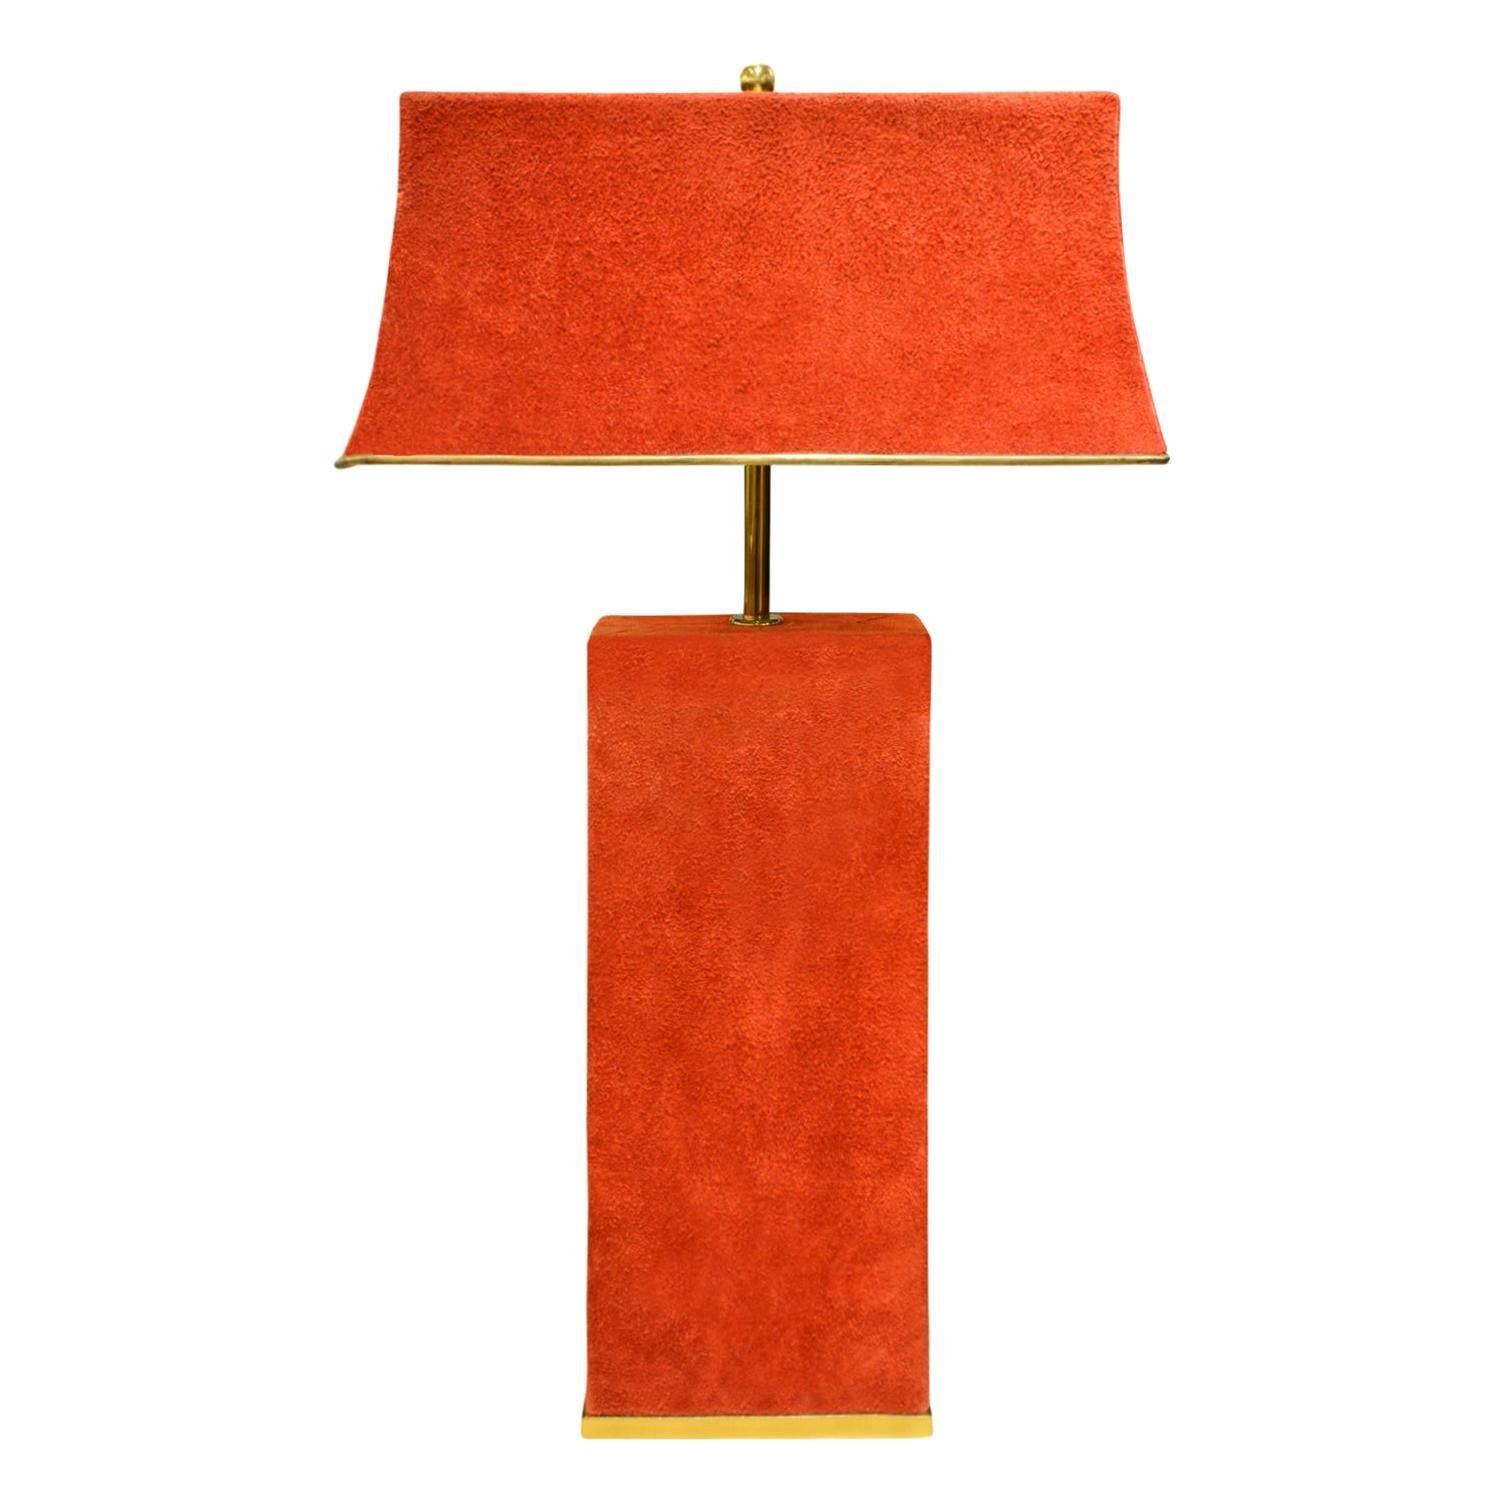 Karl Springer Chic Table Lamp in Brass and Red Suede 1970s